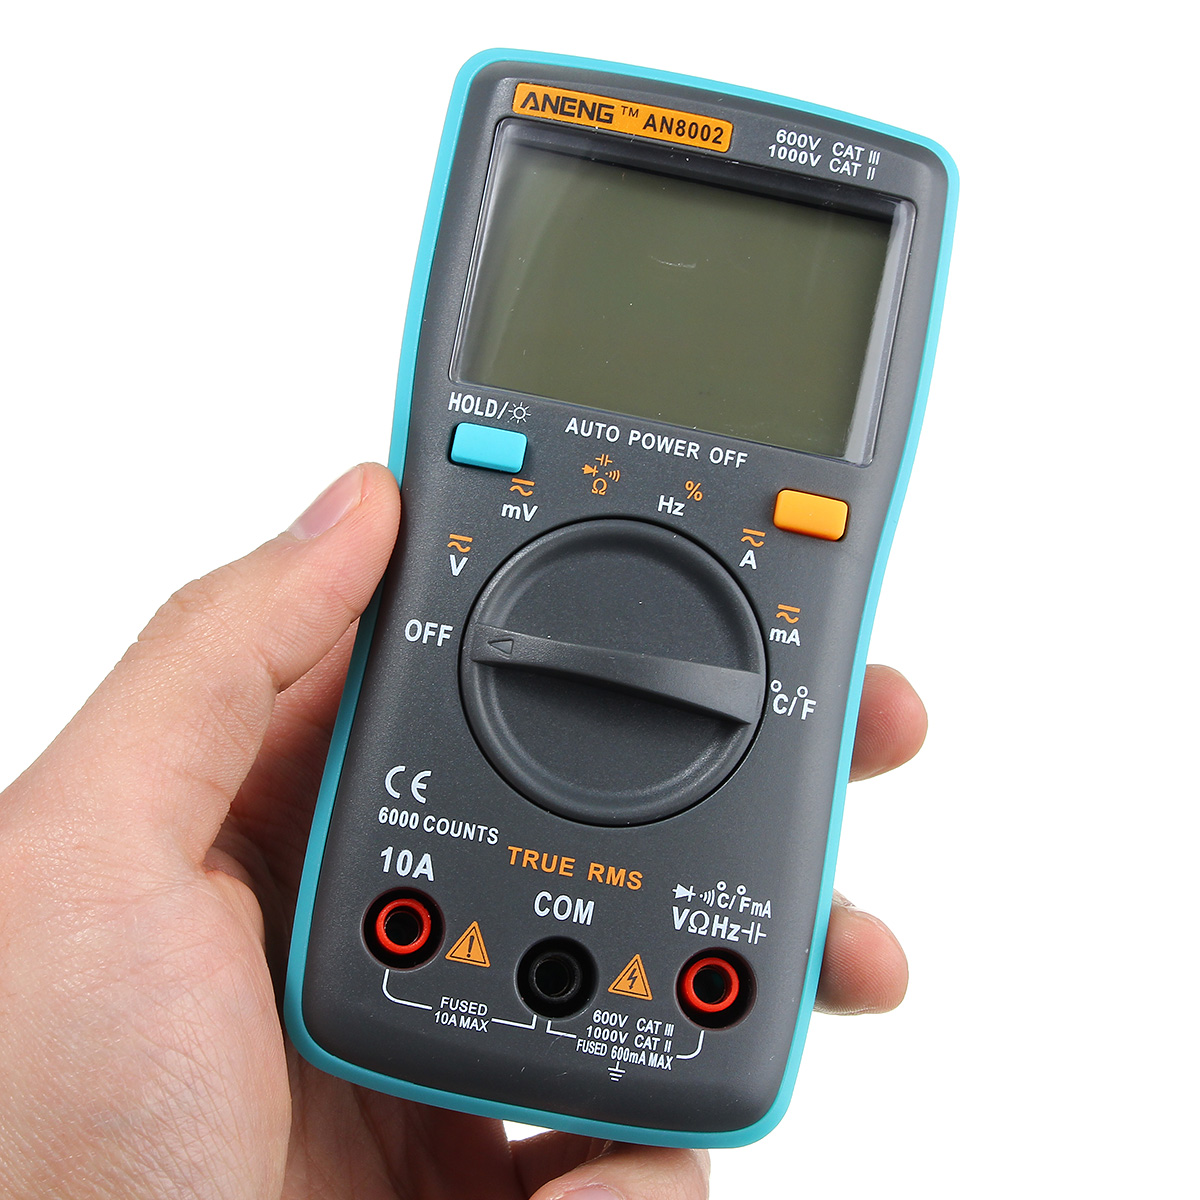 ANENG AN8002 Digital True RMS 6000 Counts Multimeter AC/DC Current Voltage Frequency Resistance Temperature Tester ℃/℉ 57